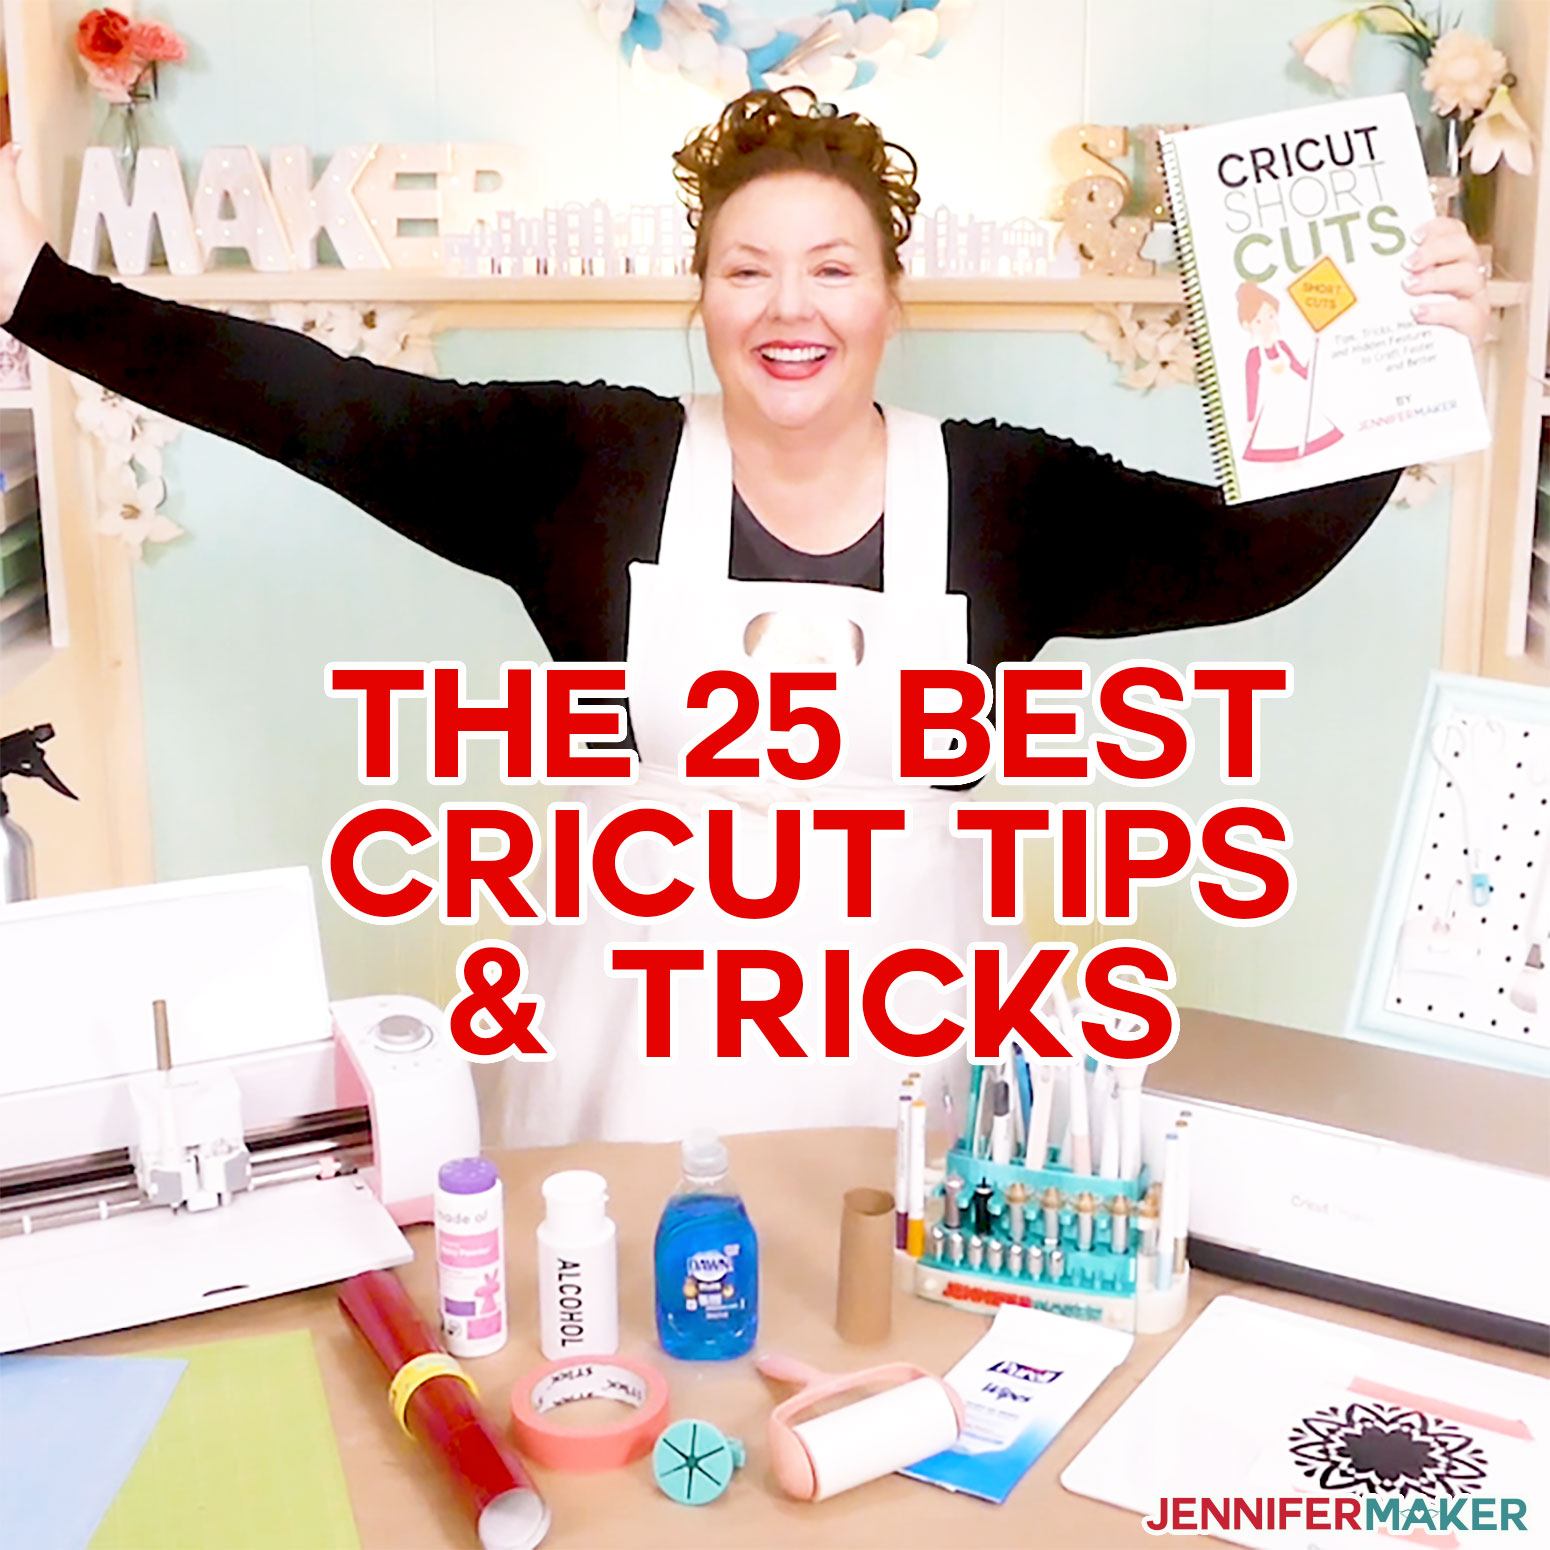 The 25 BEST Cricut Tips, Tricks, Hacks, Shortcuts, and Hidden Features You Can't Live Without!